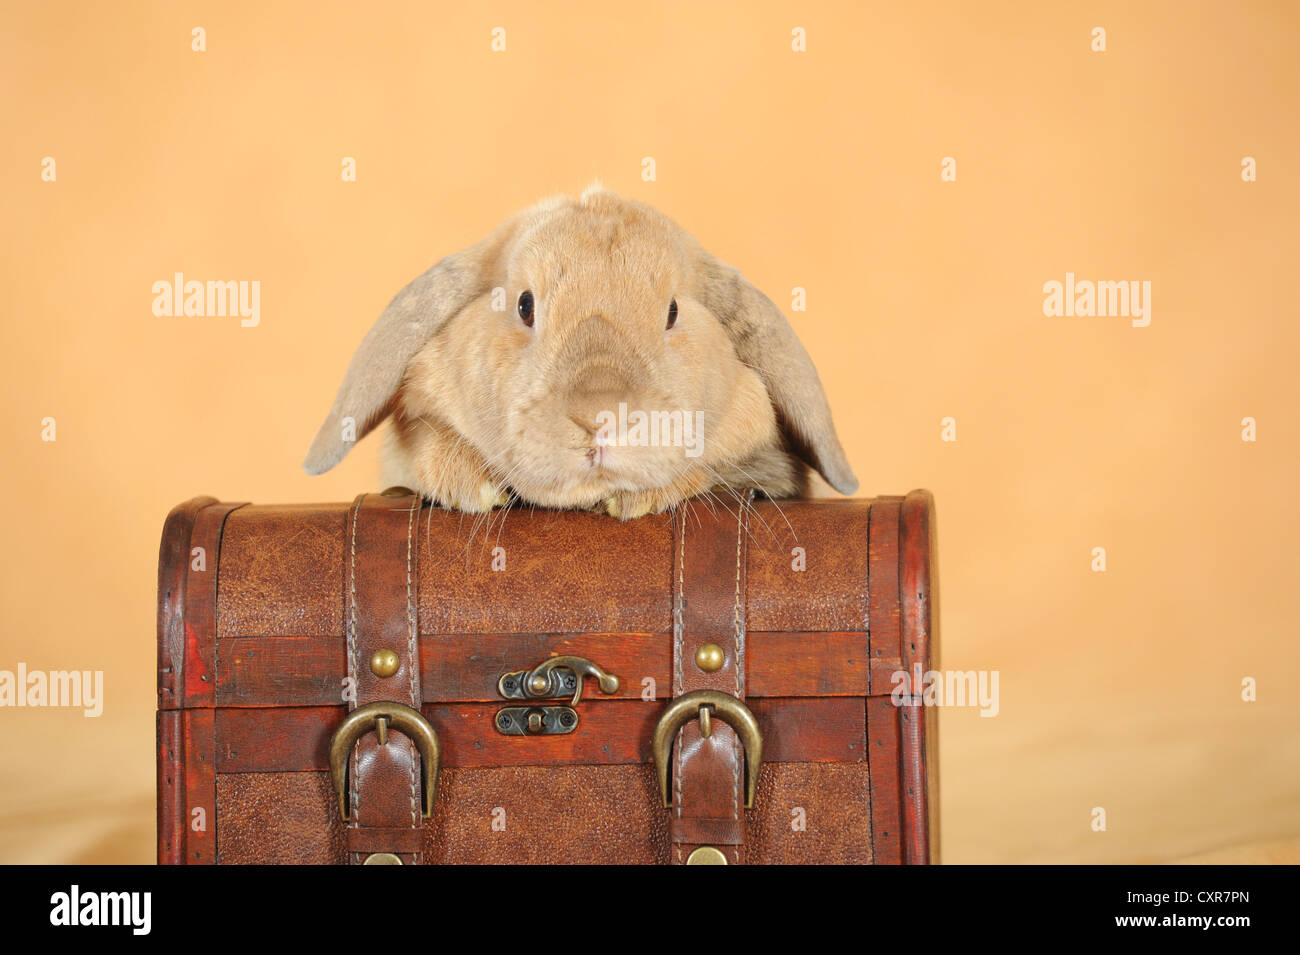 Brown dwarf English Lop rabbit leaning on a suitcase Stock Photo